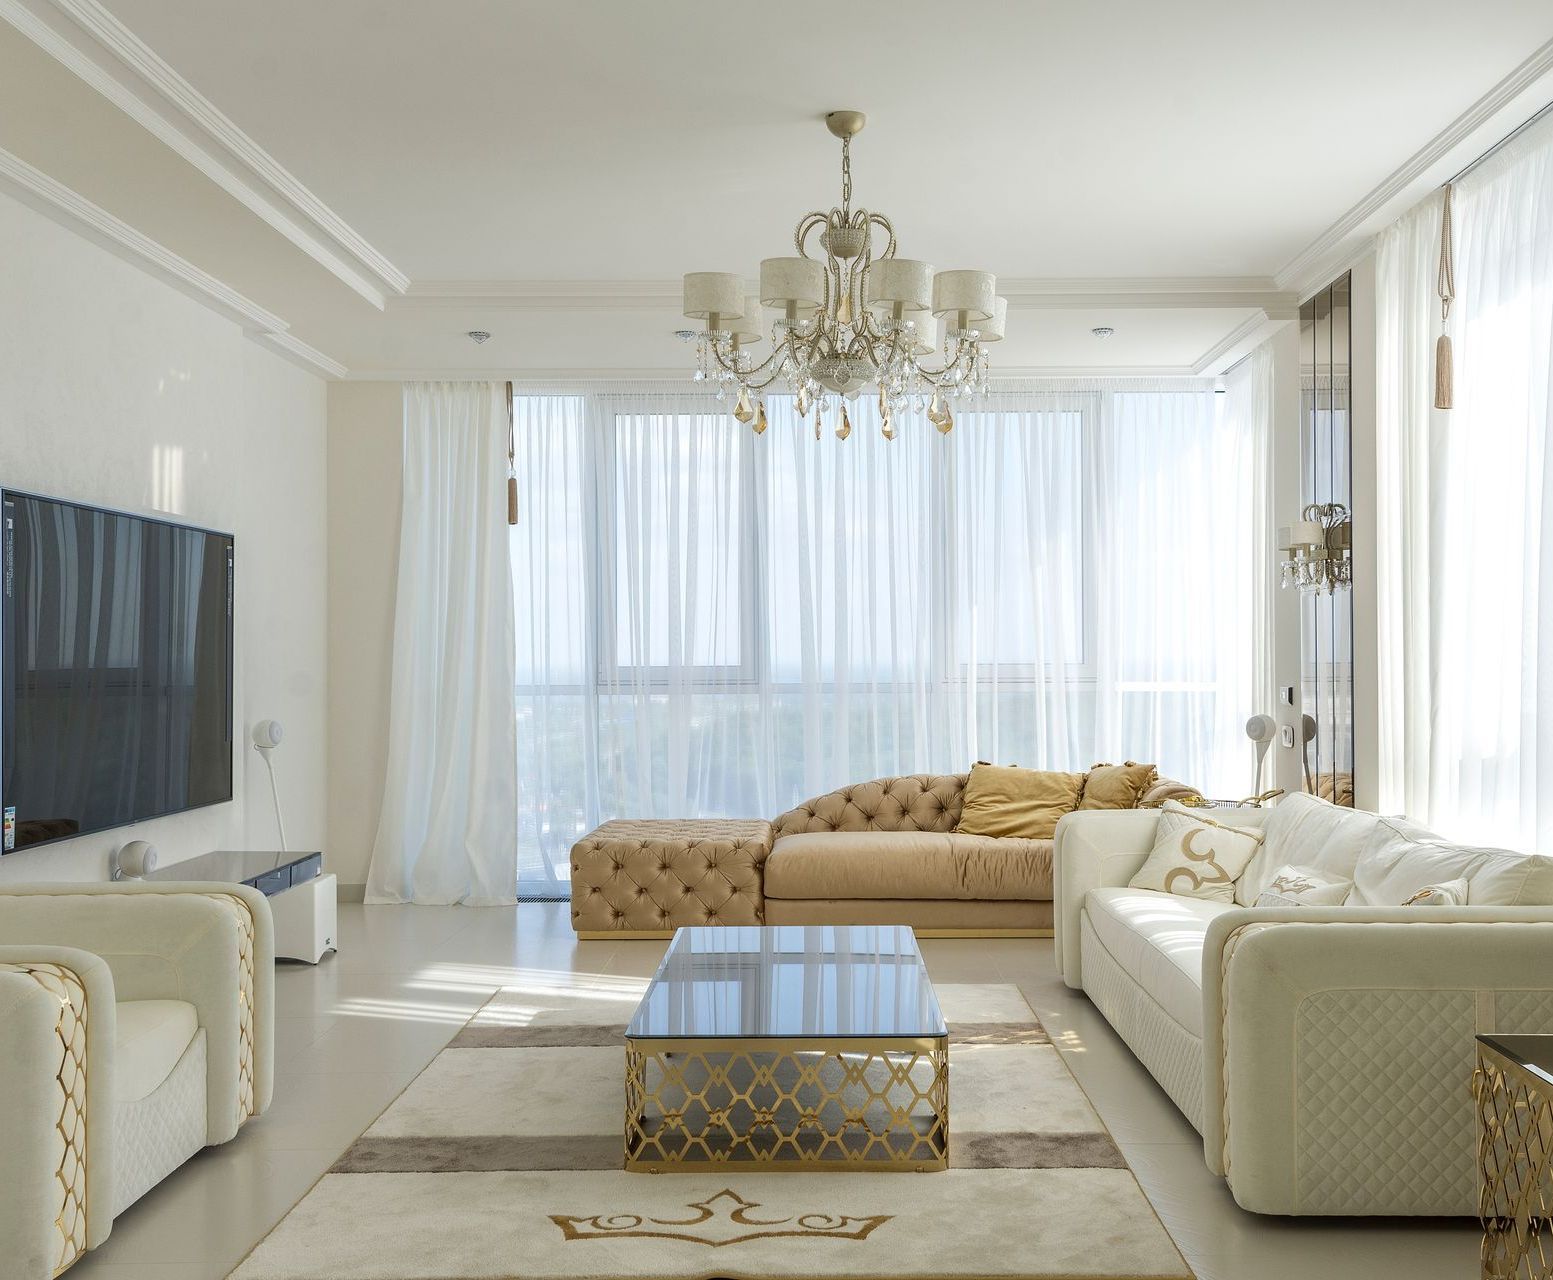 image of a spacious and bright apartment interior living room wih a sofa set, tv, huge windows and chandelier